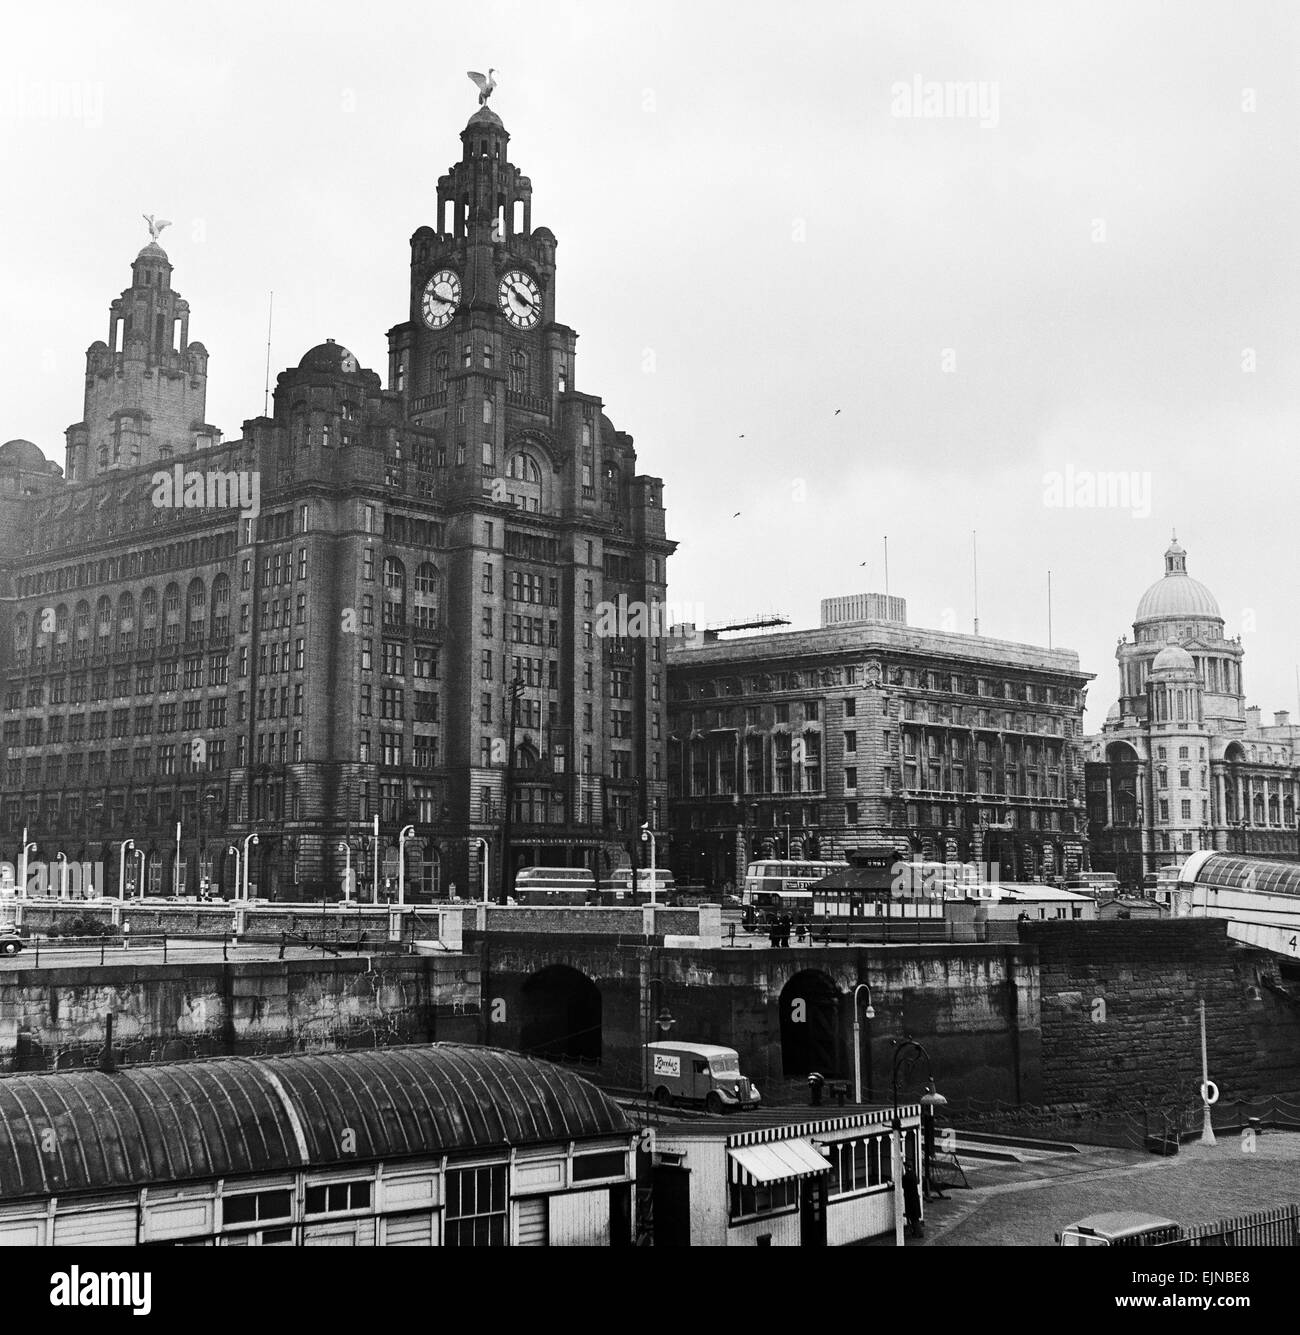 Views of Liverpool, Merseyside, 13th May 1954. Docks and Harbour Board offices, the Royal Liver Building and the Cunard Building. Life in the Mirror Series. Stock Photo